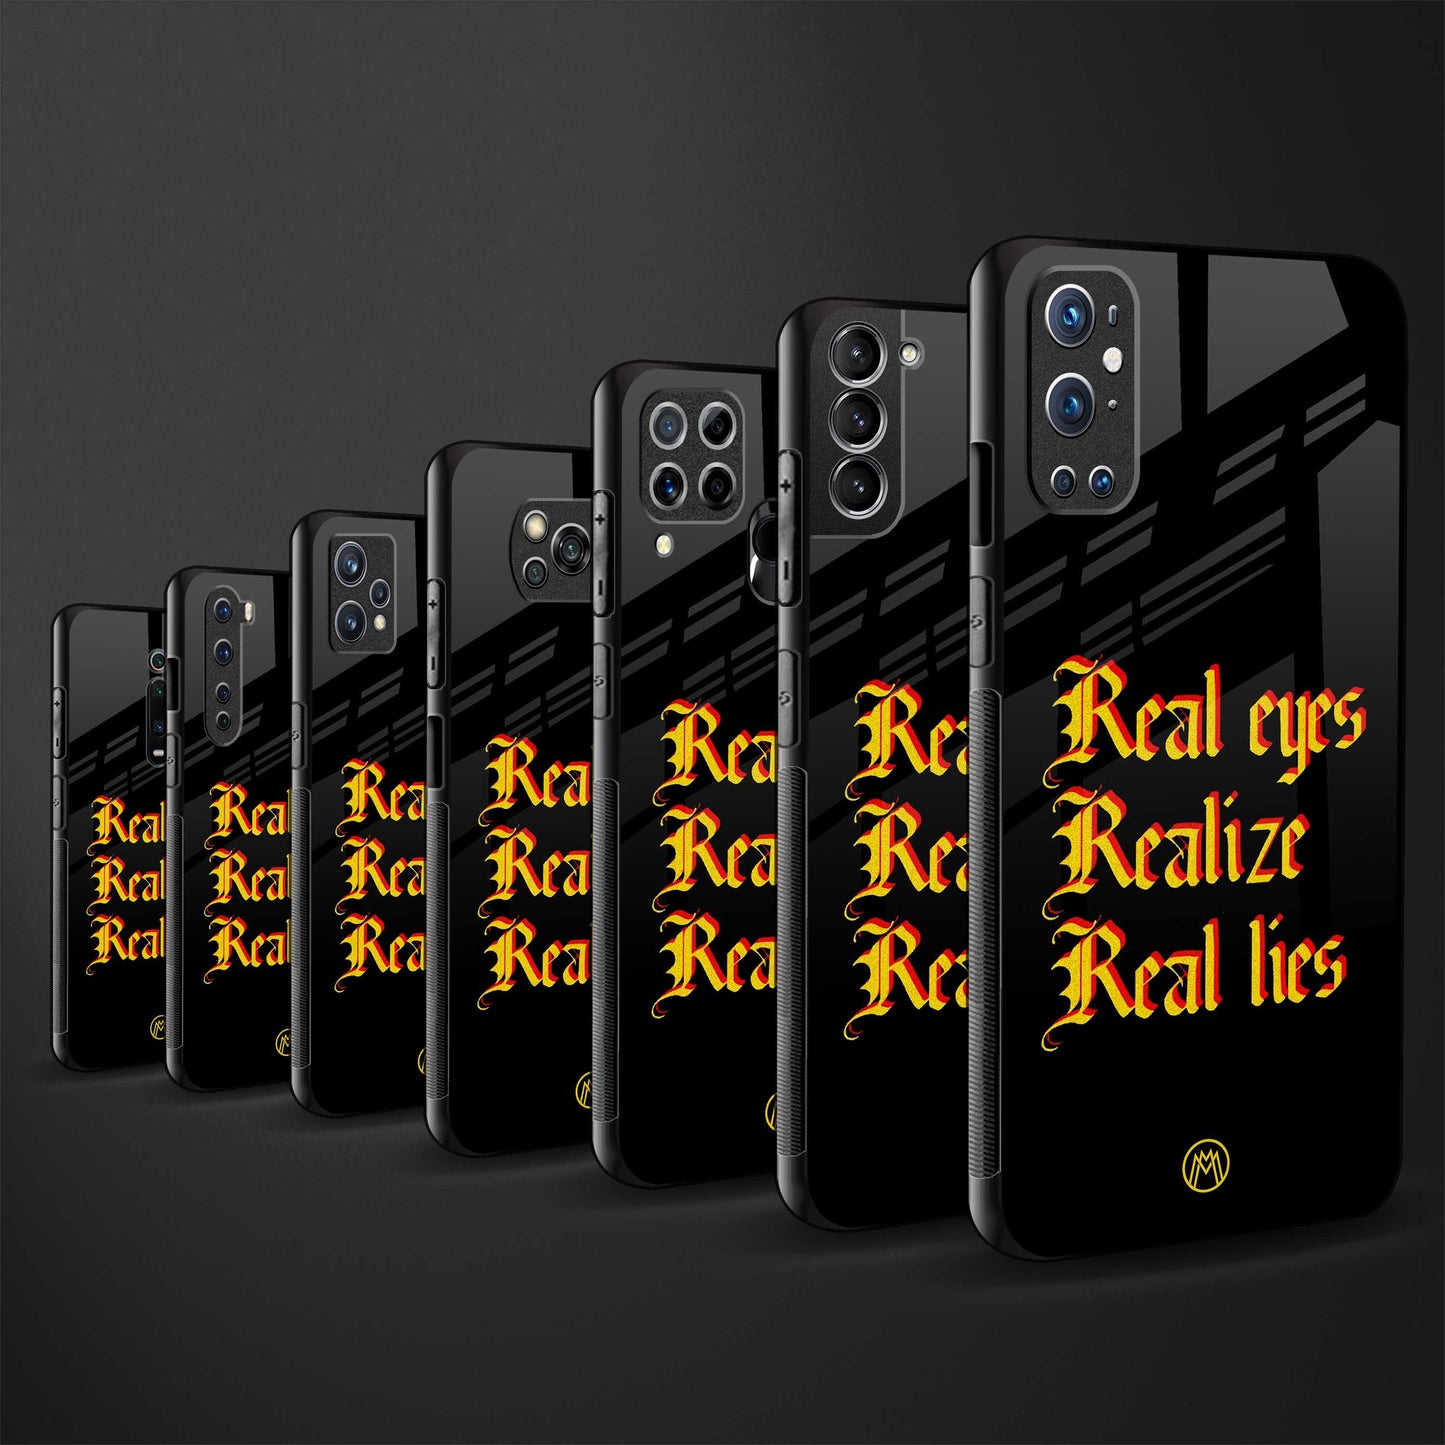 real eyes realize real lies quote glass case for samsung galaxy s22 ultra 5g image-3